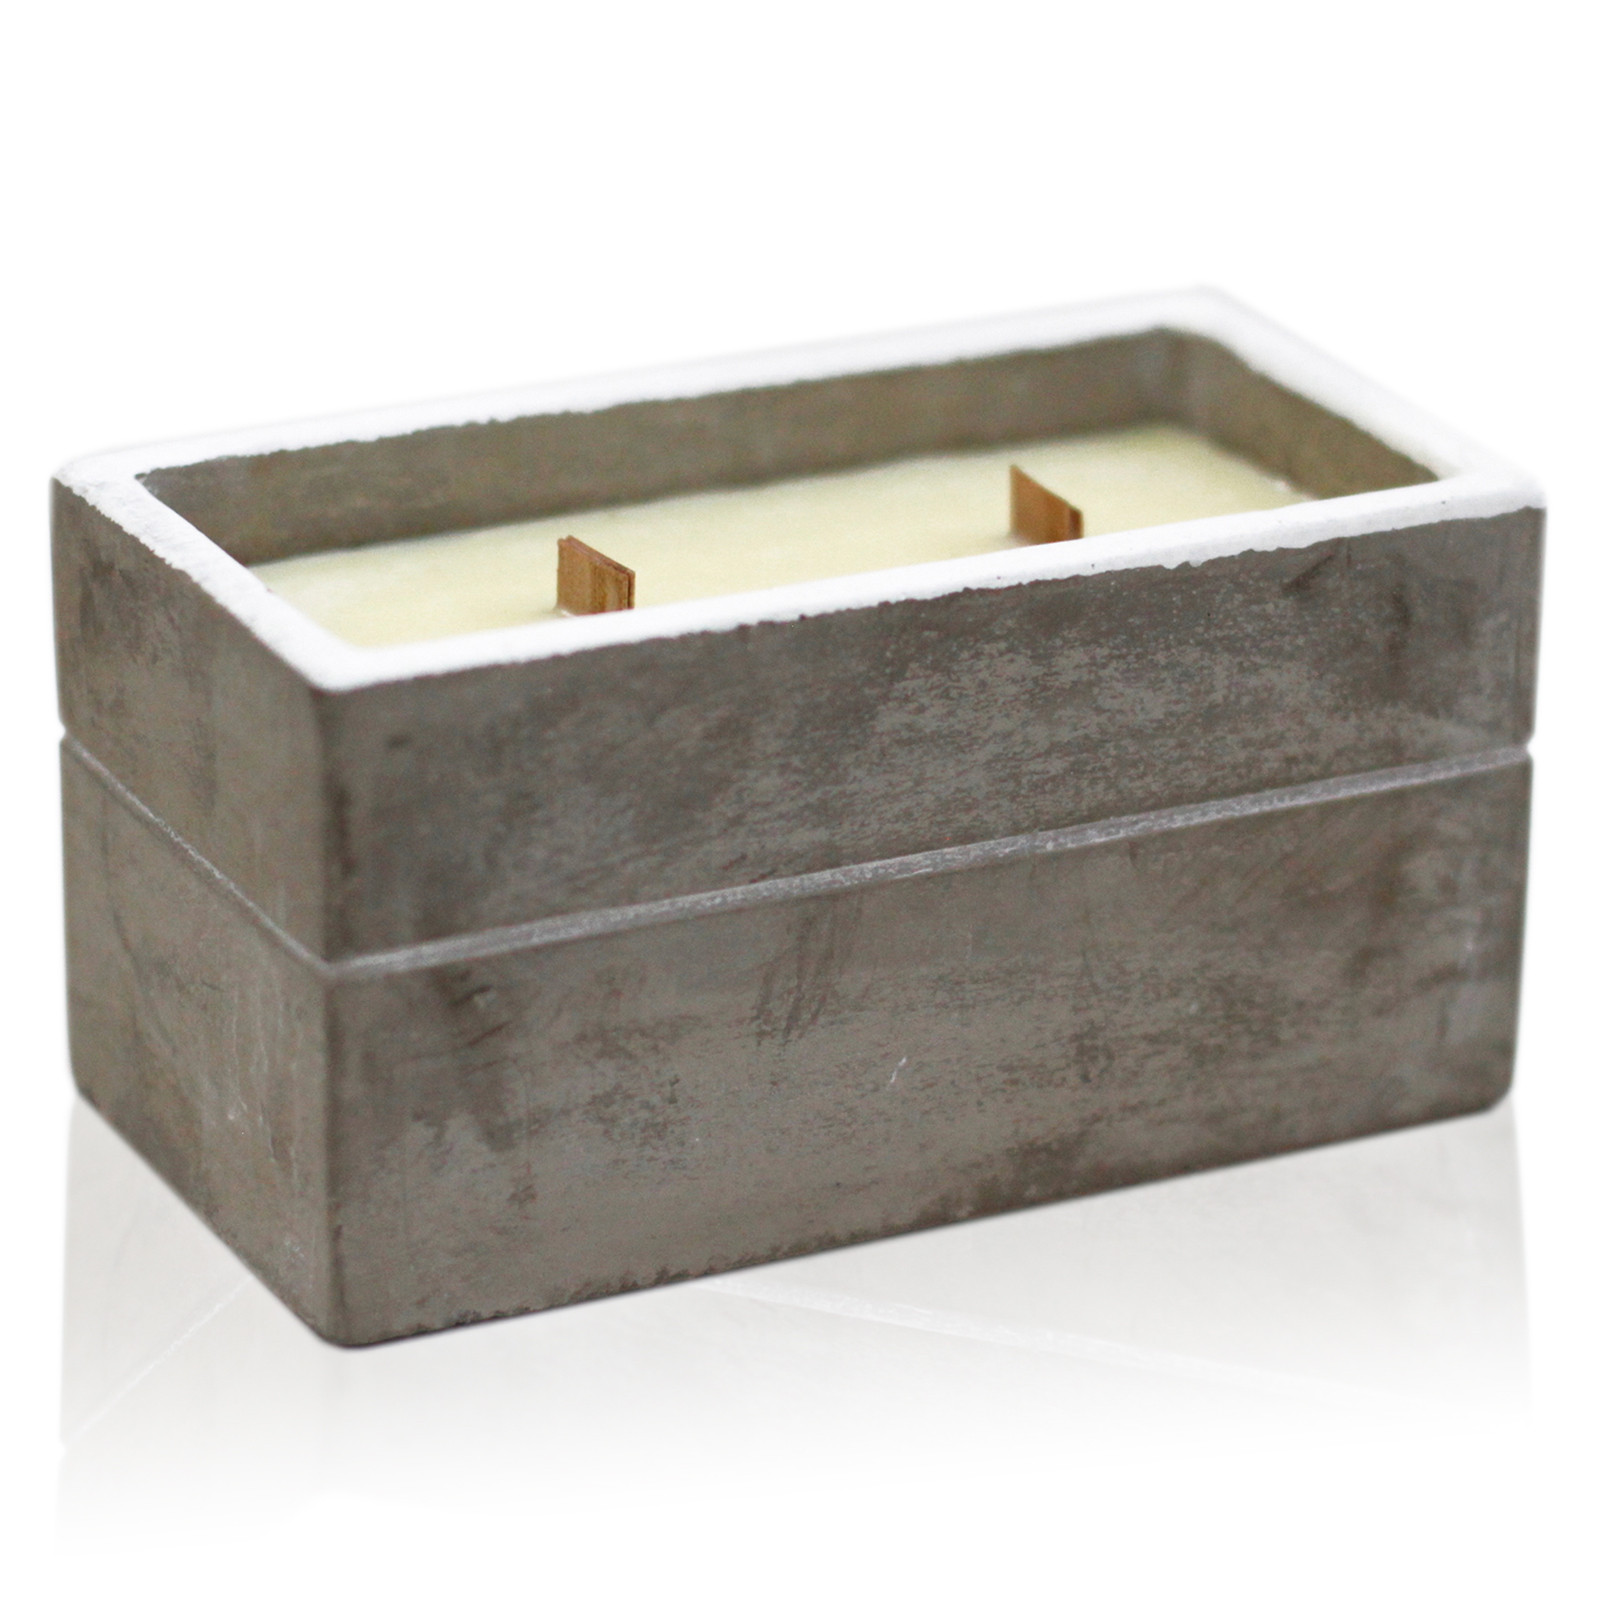 Large Concrete Soy Candle - Spiced South Sea Lime CWC-03